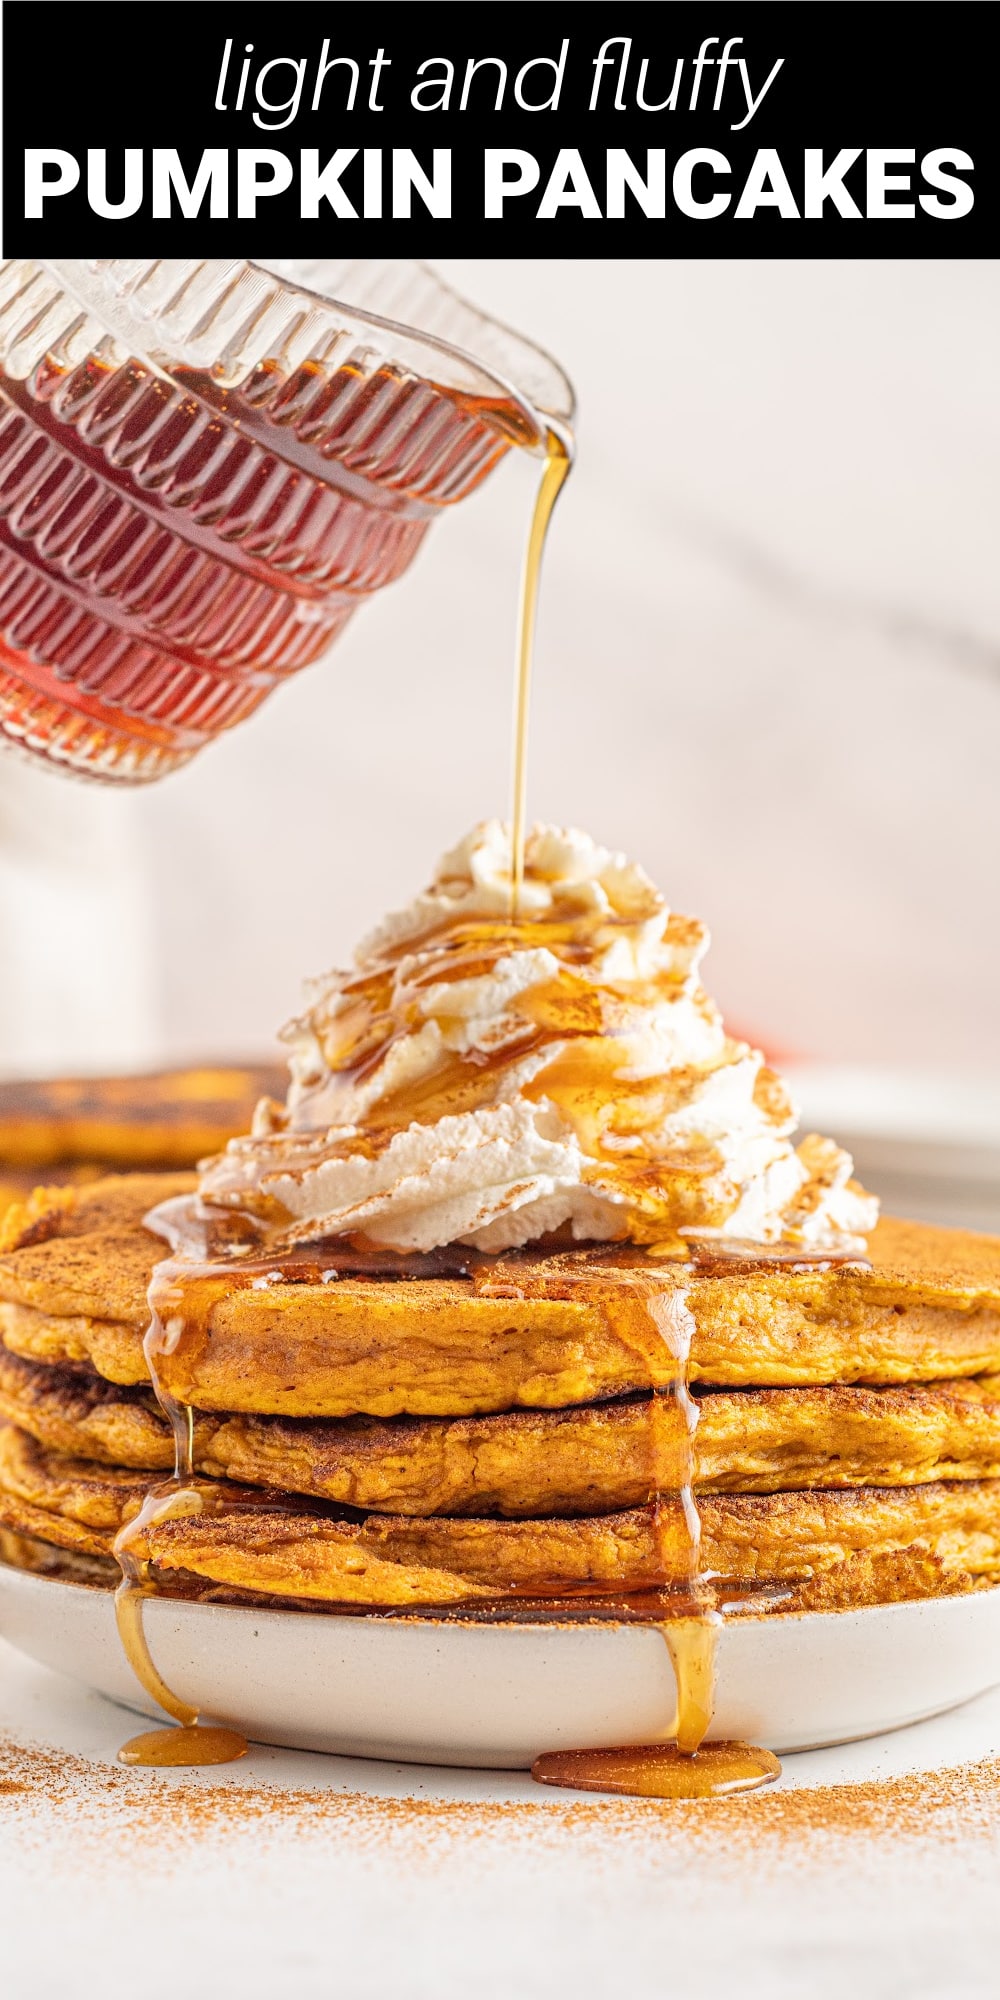 This Pumpkin Pancakes recipe makes amazingly fluffy and tender pancakes with slightly crispy edges. The flavors are so warm and inviting, they’ll immediately have you craving all things fall. And once you see how easy they are to make, you'll never want to use a box mix again!